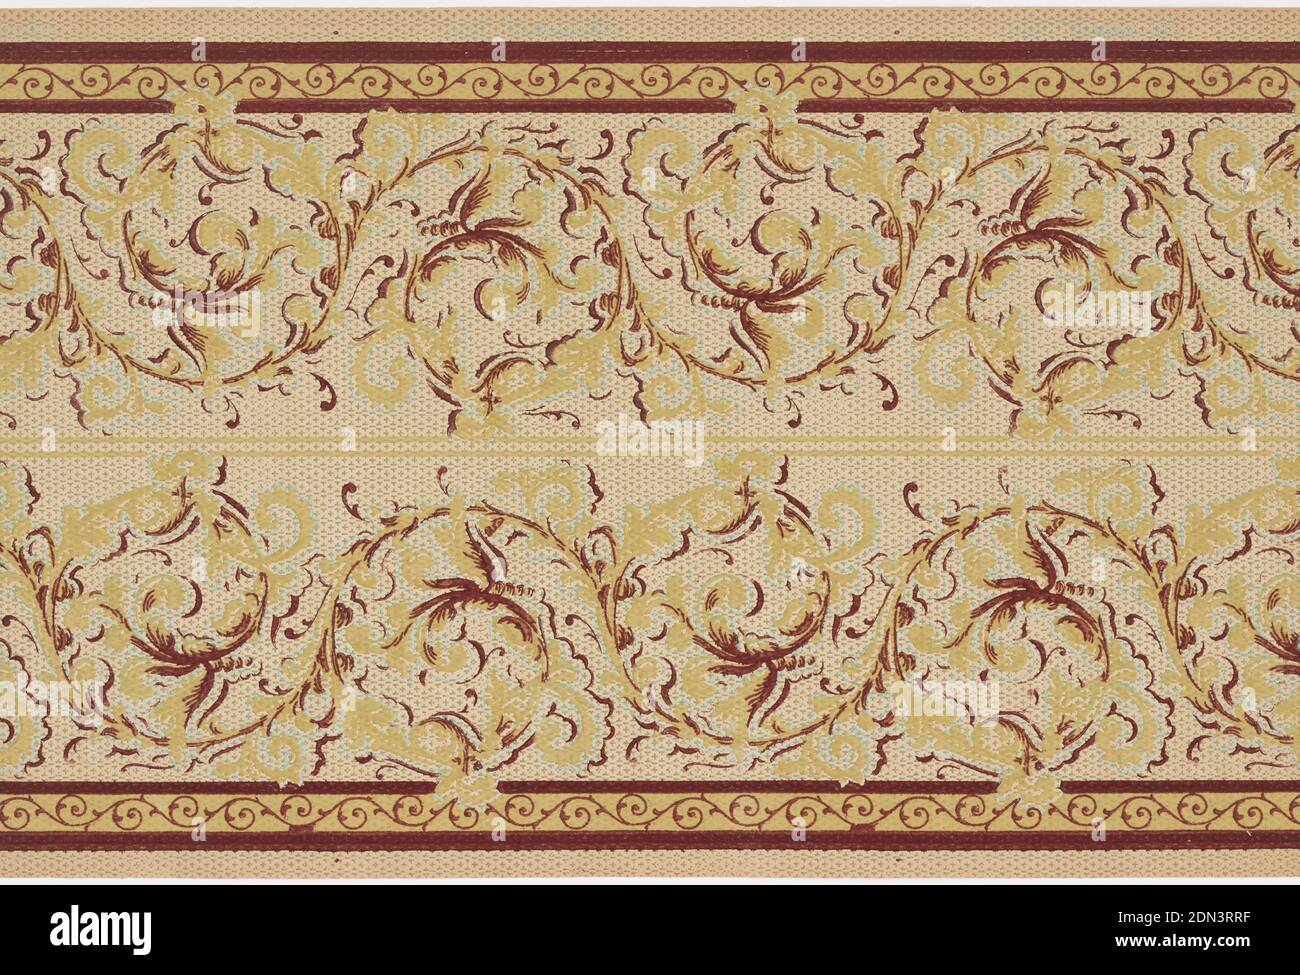 Frieze, Maxwell & Co., S.A., Chicago, Illinois, USA, Machine-printed paper, Wide band of foliate rinceau, with much narrower rinceau along bottom edge. Printed two across., USA, 1905–1915, Wallcoverings, Frieze Stock Photo